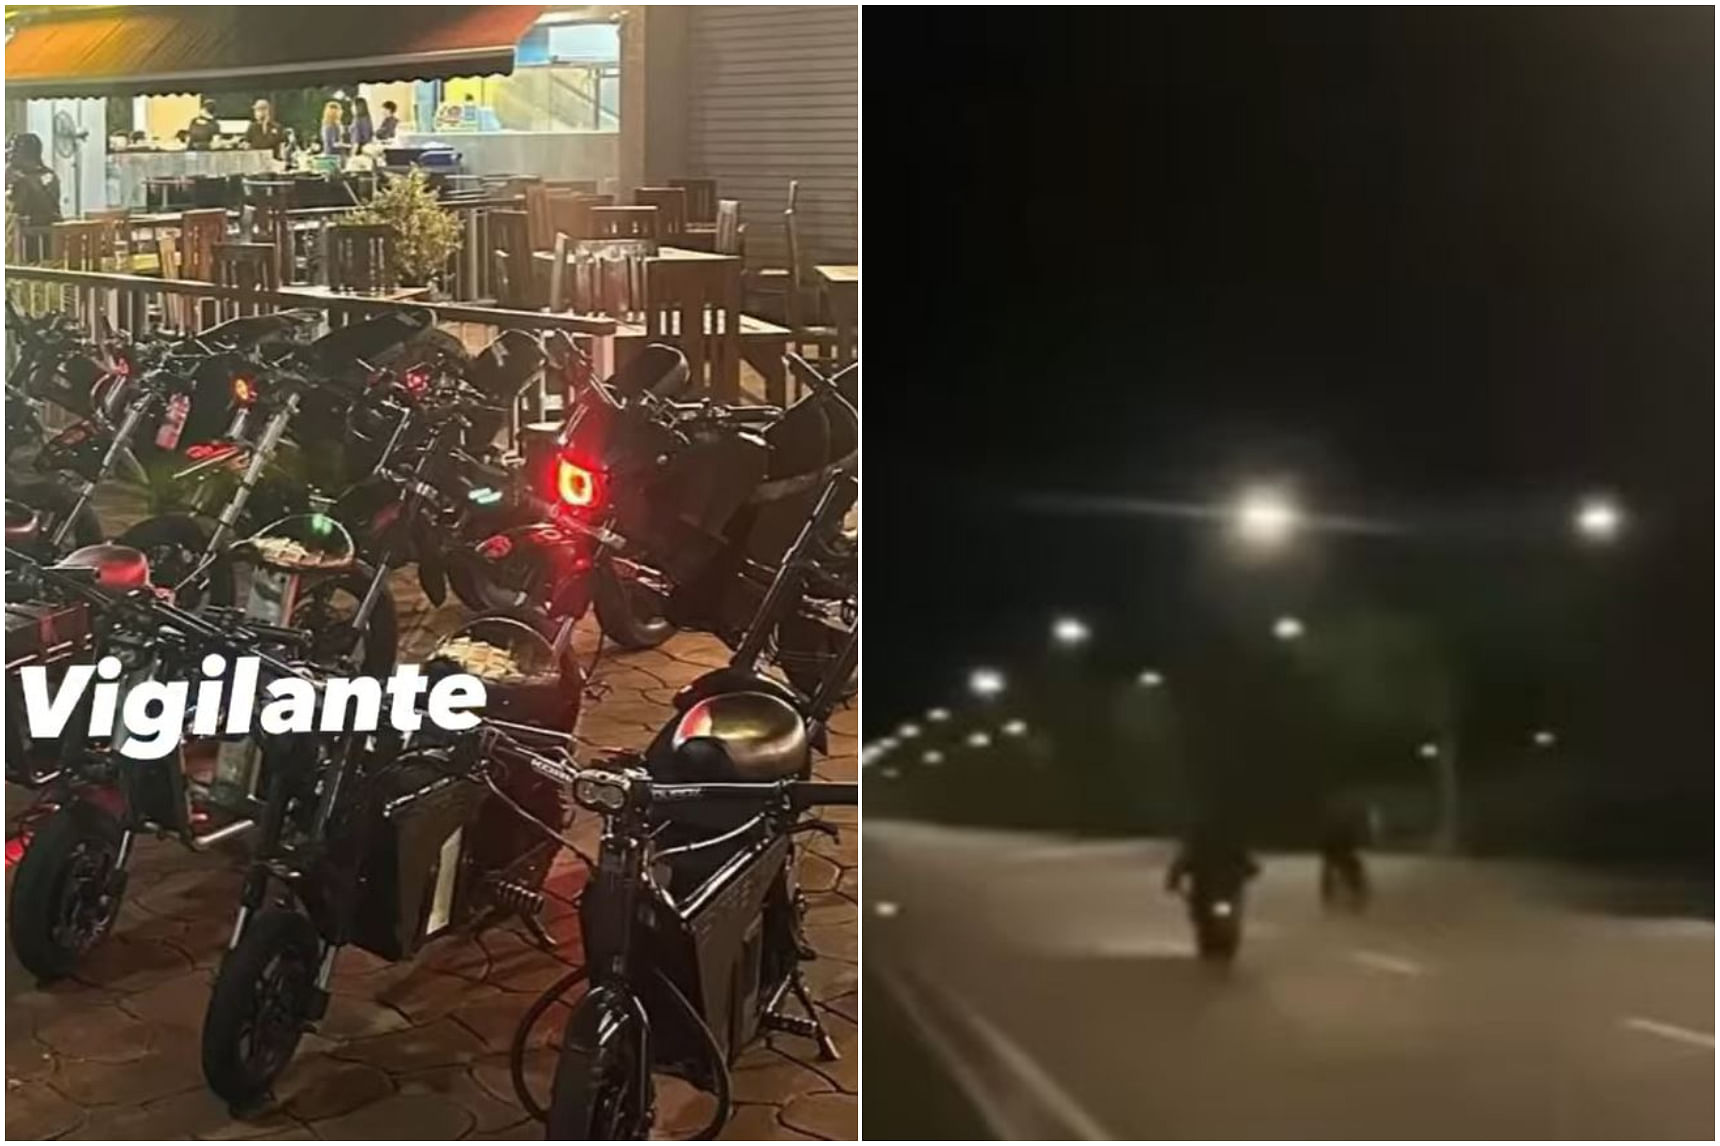 LTA investigating e-bikes, e-scooters seen racing at various spots, will step up enforcement